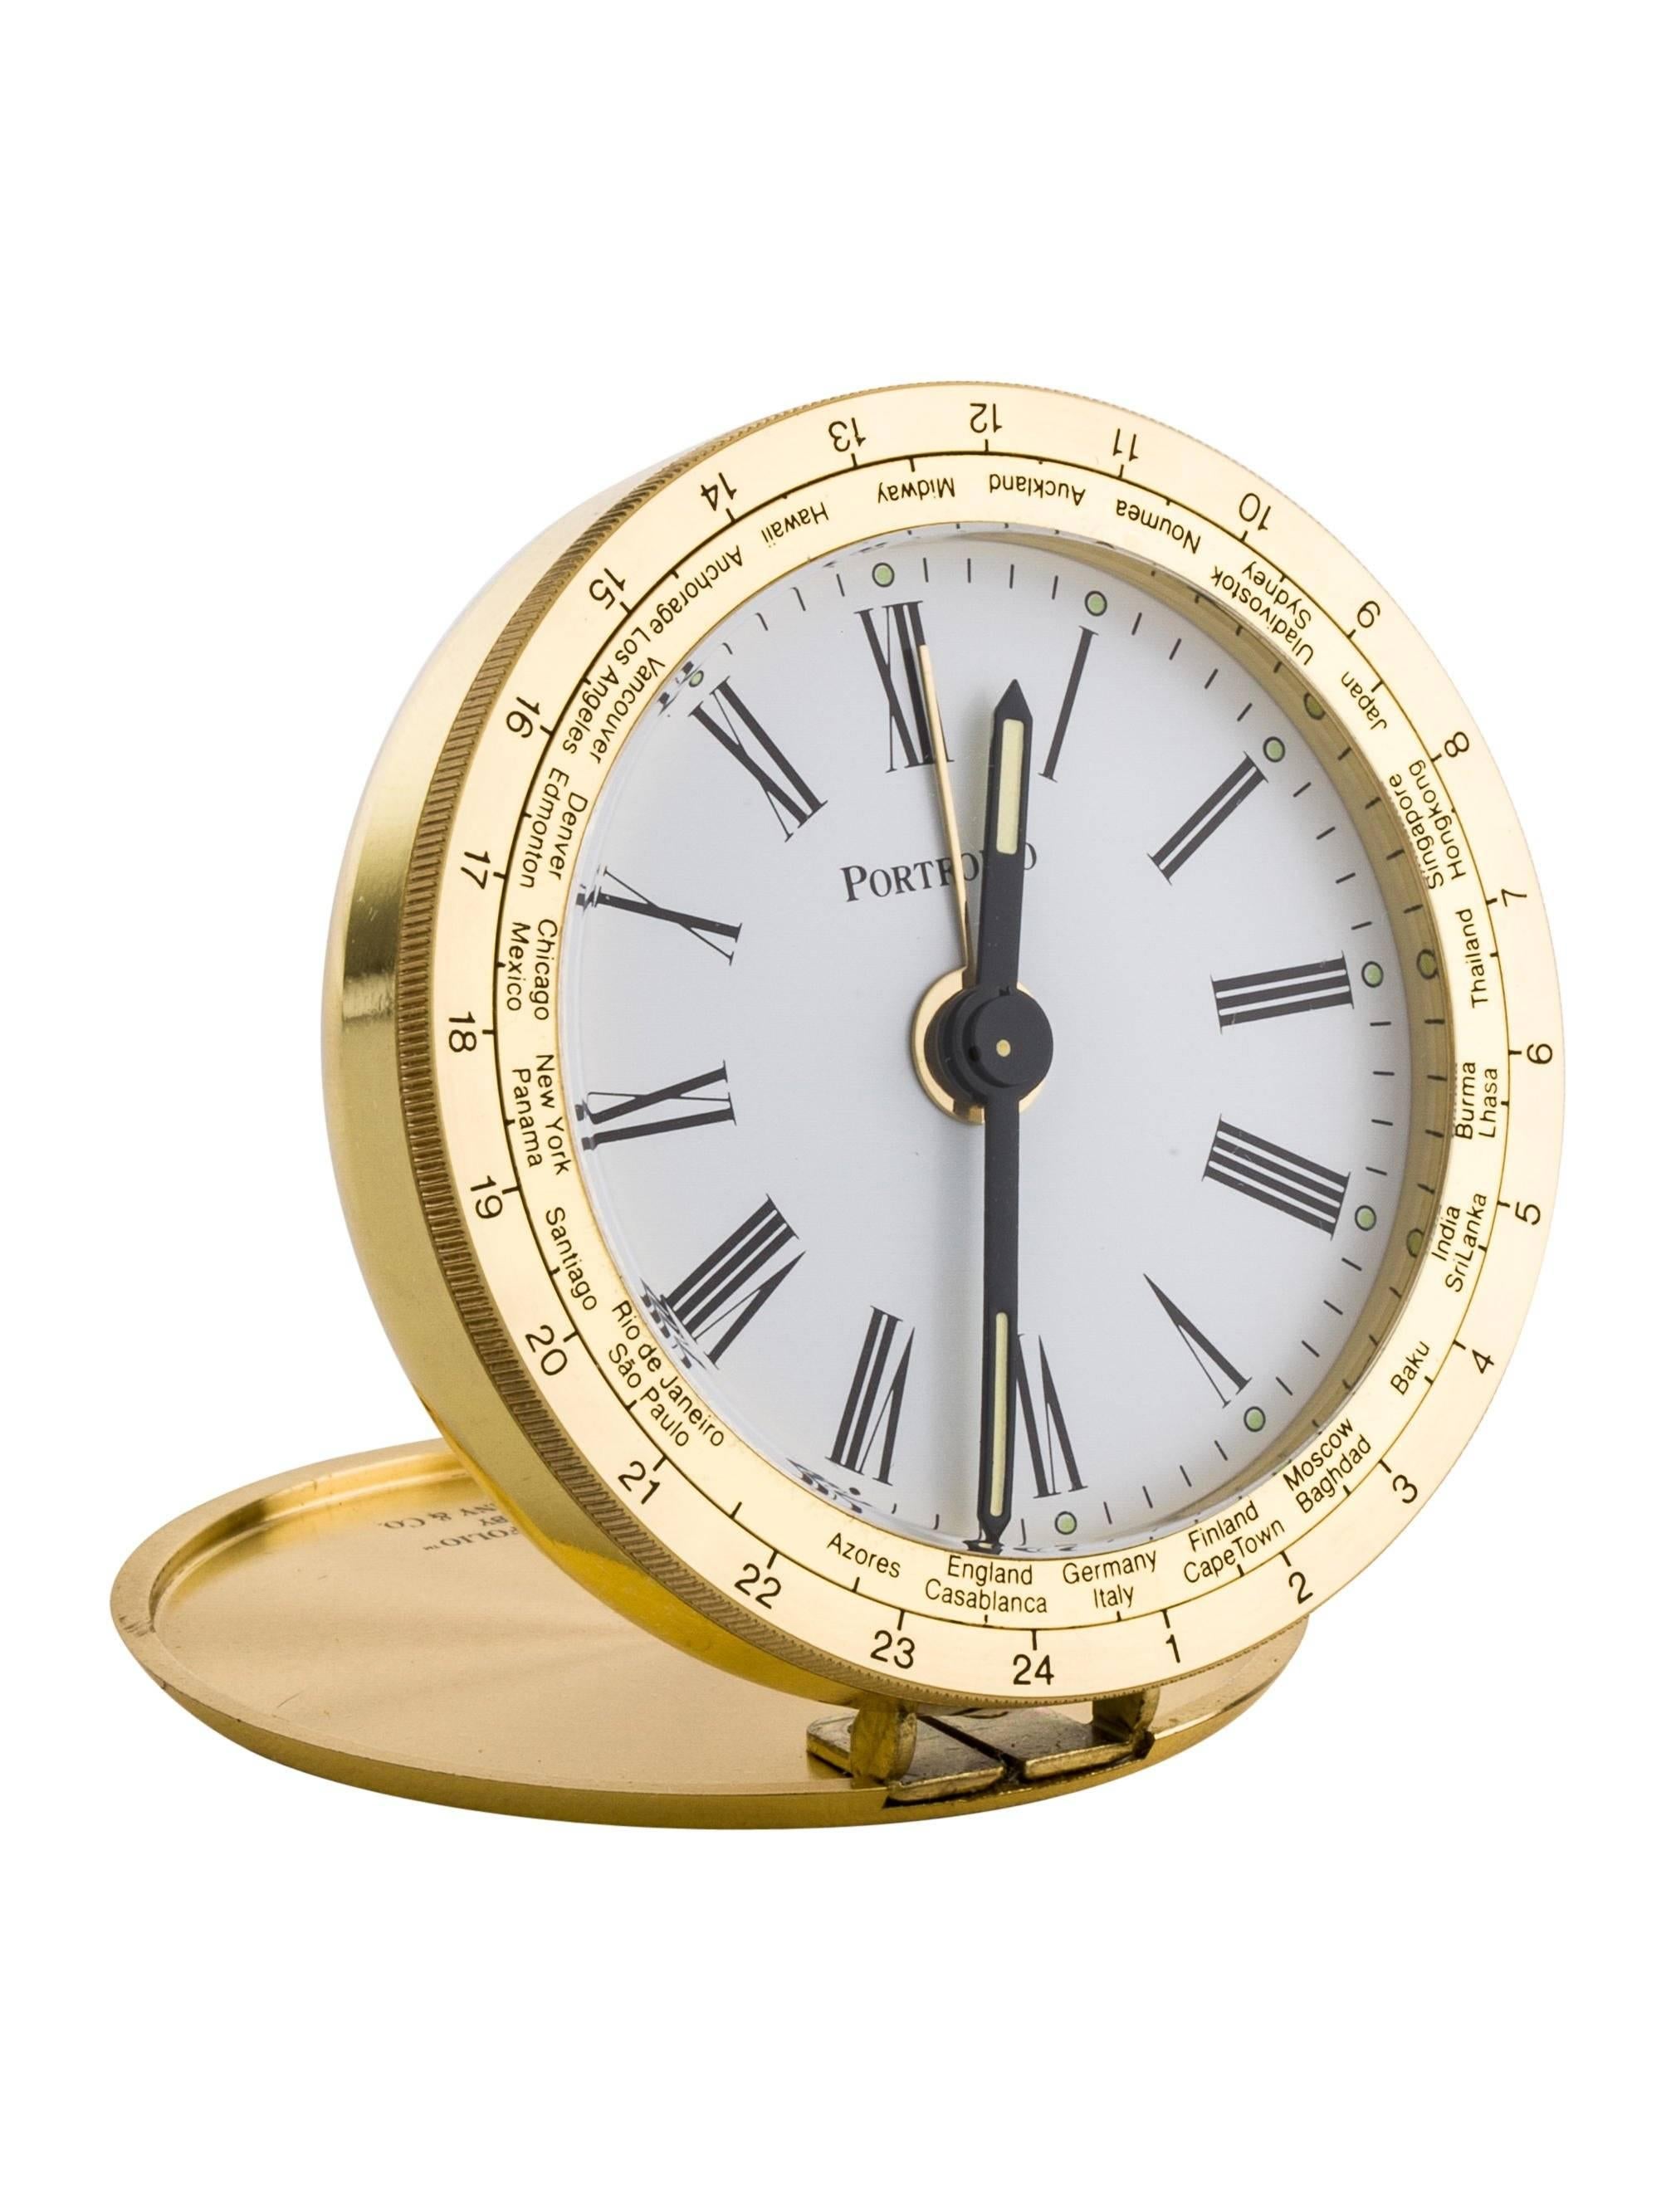 CURATOR'S NOTES

Tiffany & Co Gold Travel Decor Desk Table Alarm Clock in Box

Stainless steel
Gold tone
Signed
Quartz movement 
Alarm and time features
Includes original Tiffany & Co dust bag and box 
Diameter 2.25"
Depth 0.5"